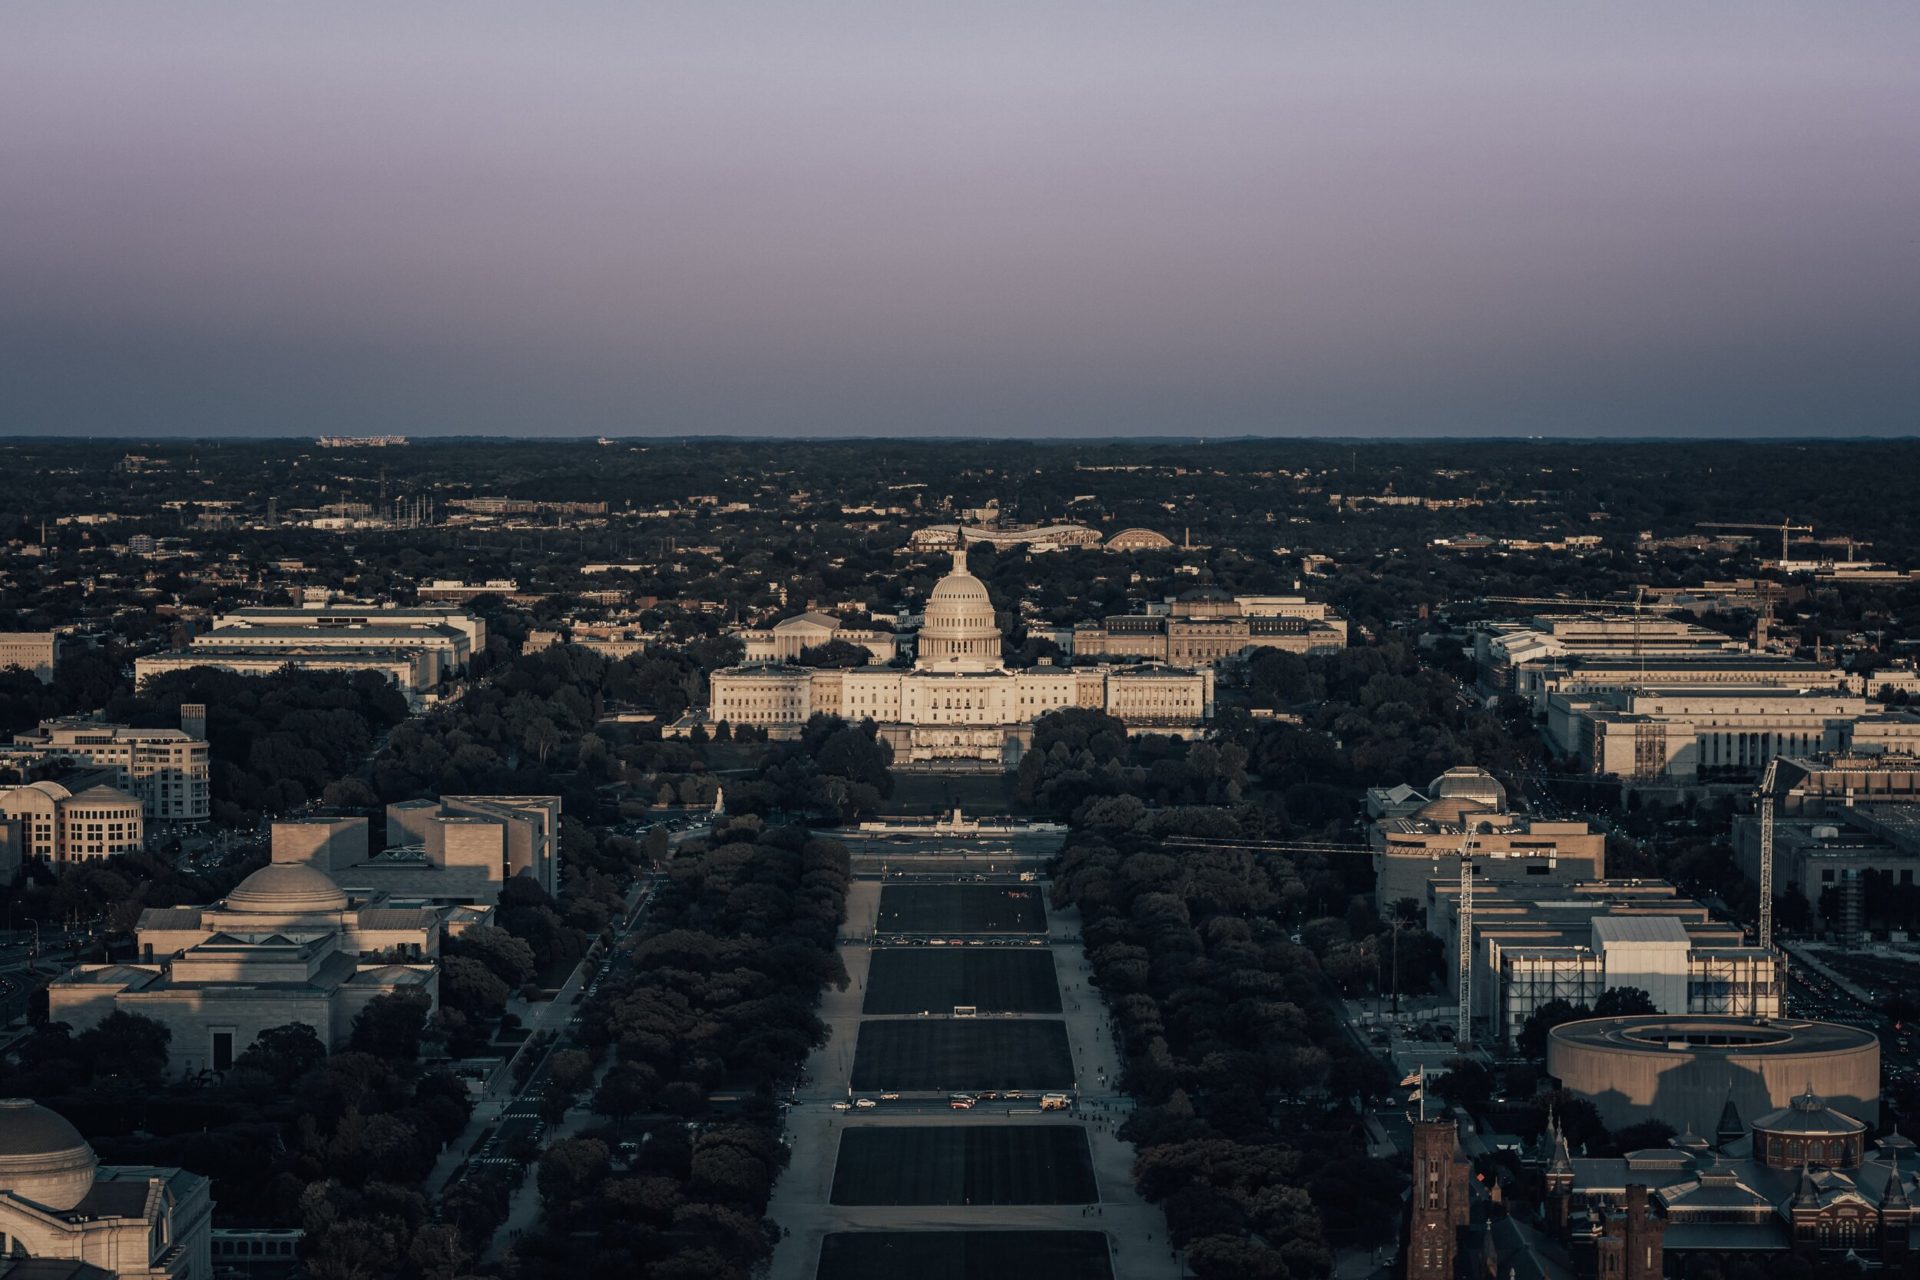 United States Capitol from top of the Washington Monument. (Photo by Andy Feliciotti | Unsplash)